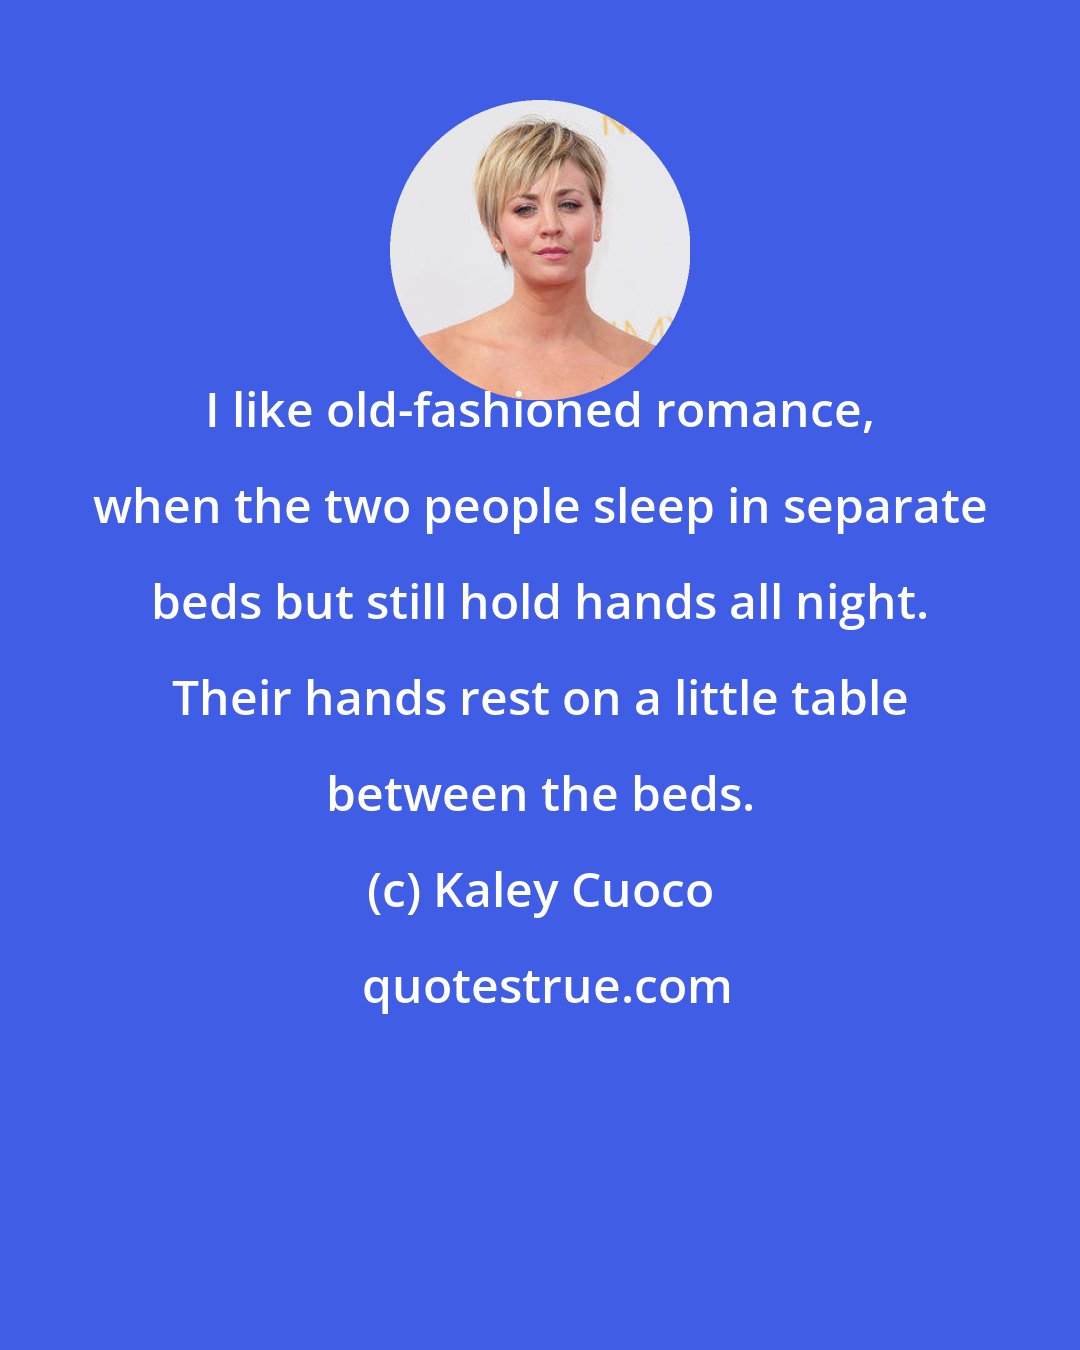 Kaley Cuoco: I like old-fashioned romance, when the two people sleep in separate beds but still hold hands all night. Their hands rest on a little table between the beds.